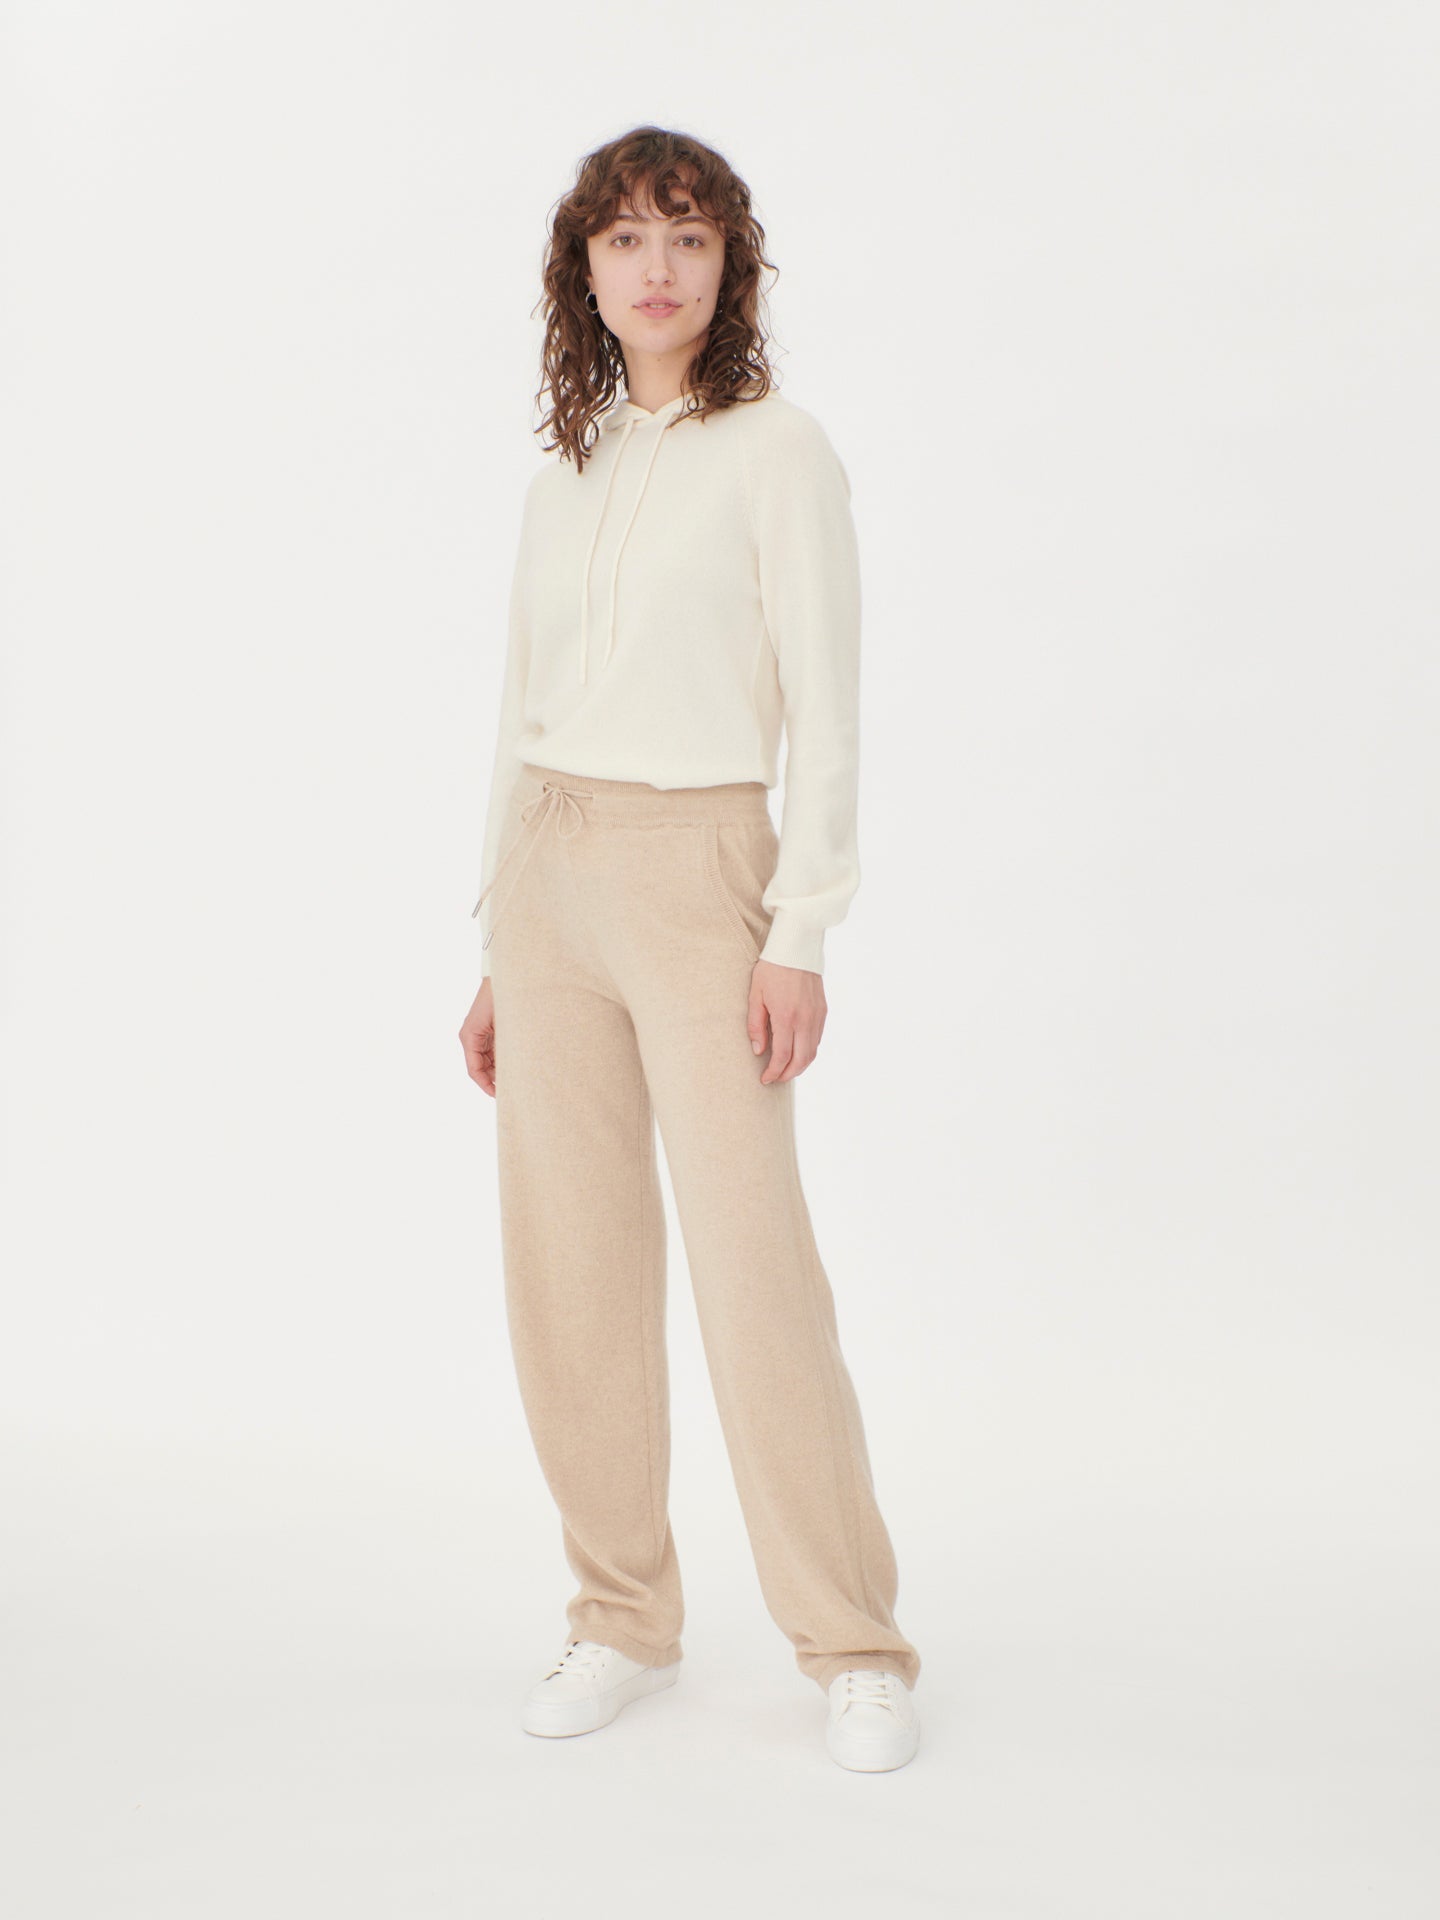 Undyed Organic Cashmere Collection for Women | GOBI Cashmere